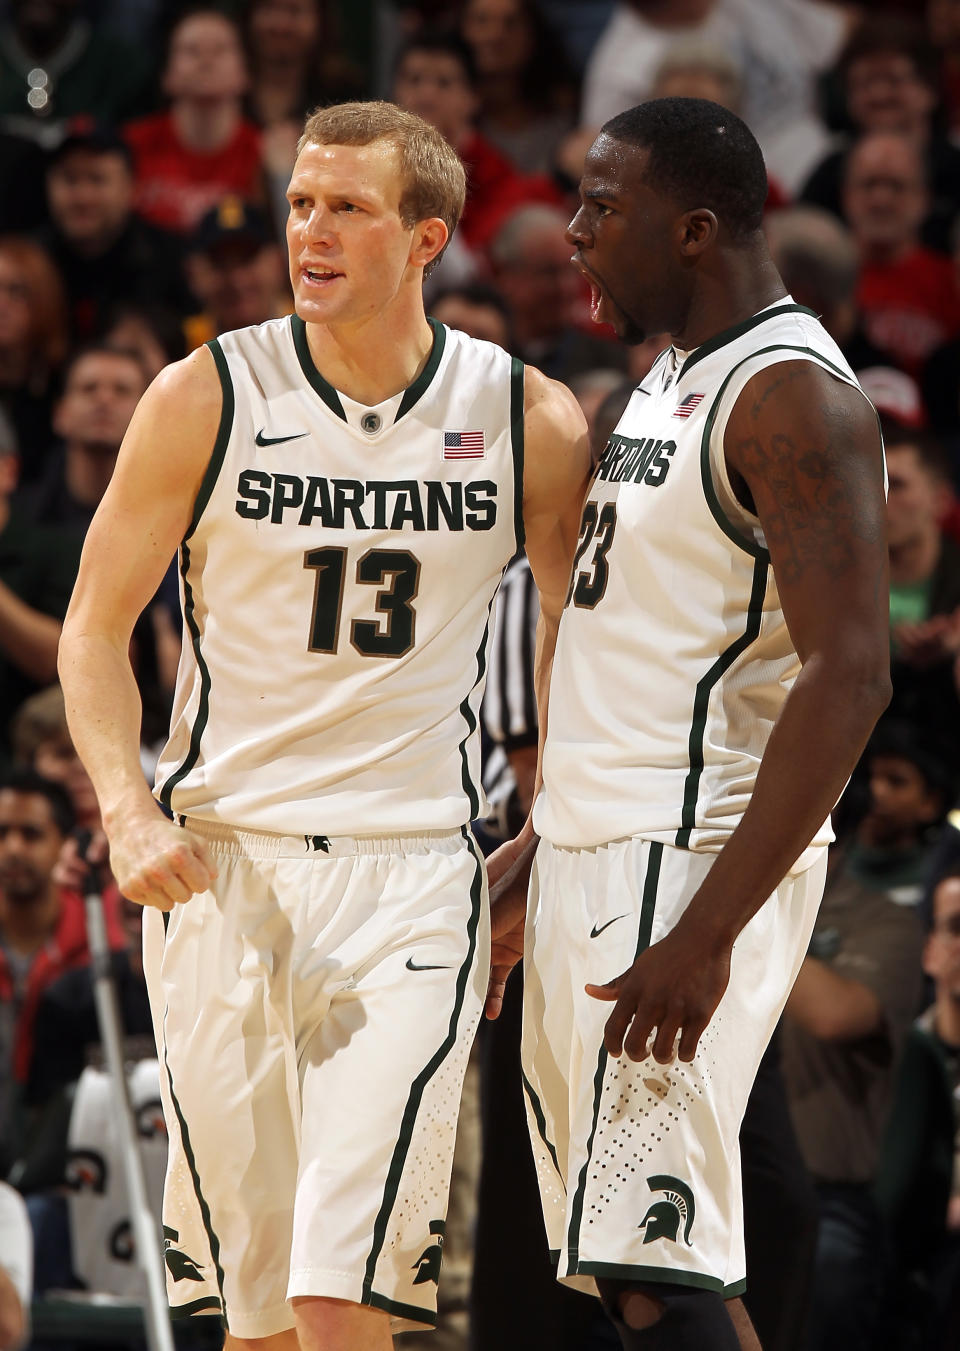 INDIANAPOLIS, IN - MARCH 11: (L-R) Austin Thornton #13 and Draymond Green #23 of the Michigan State Spartans celebrate against the Ohio State Buckeyes during the Final Game of the 2012 Big Ten Men's Conference Basketball Tournament at Bankers Life Fieldhouse on March 11, 2012 in Indianapolis, Indiana. Michigan St. won 68-64. (Photo by Jonathan Daniel/Getty Images)